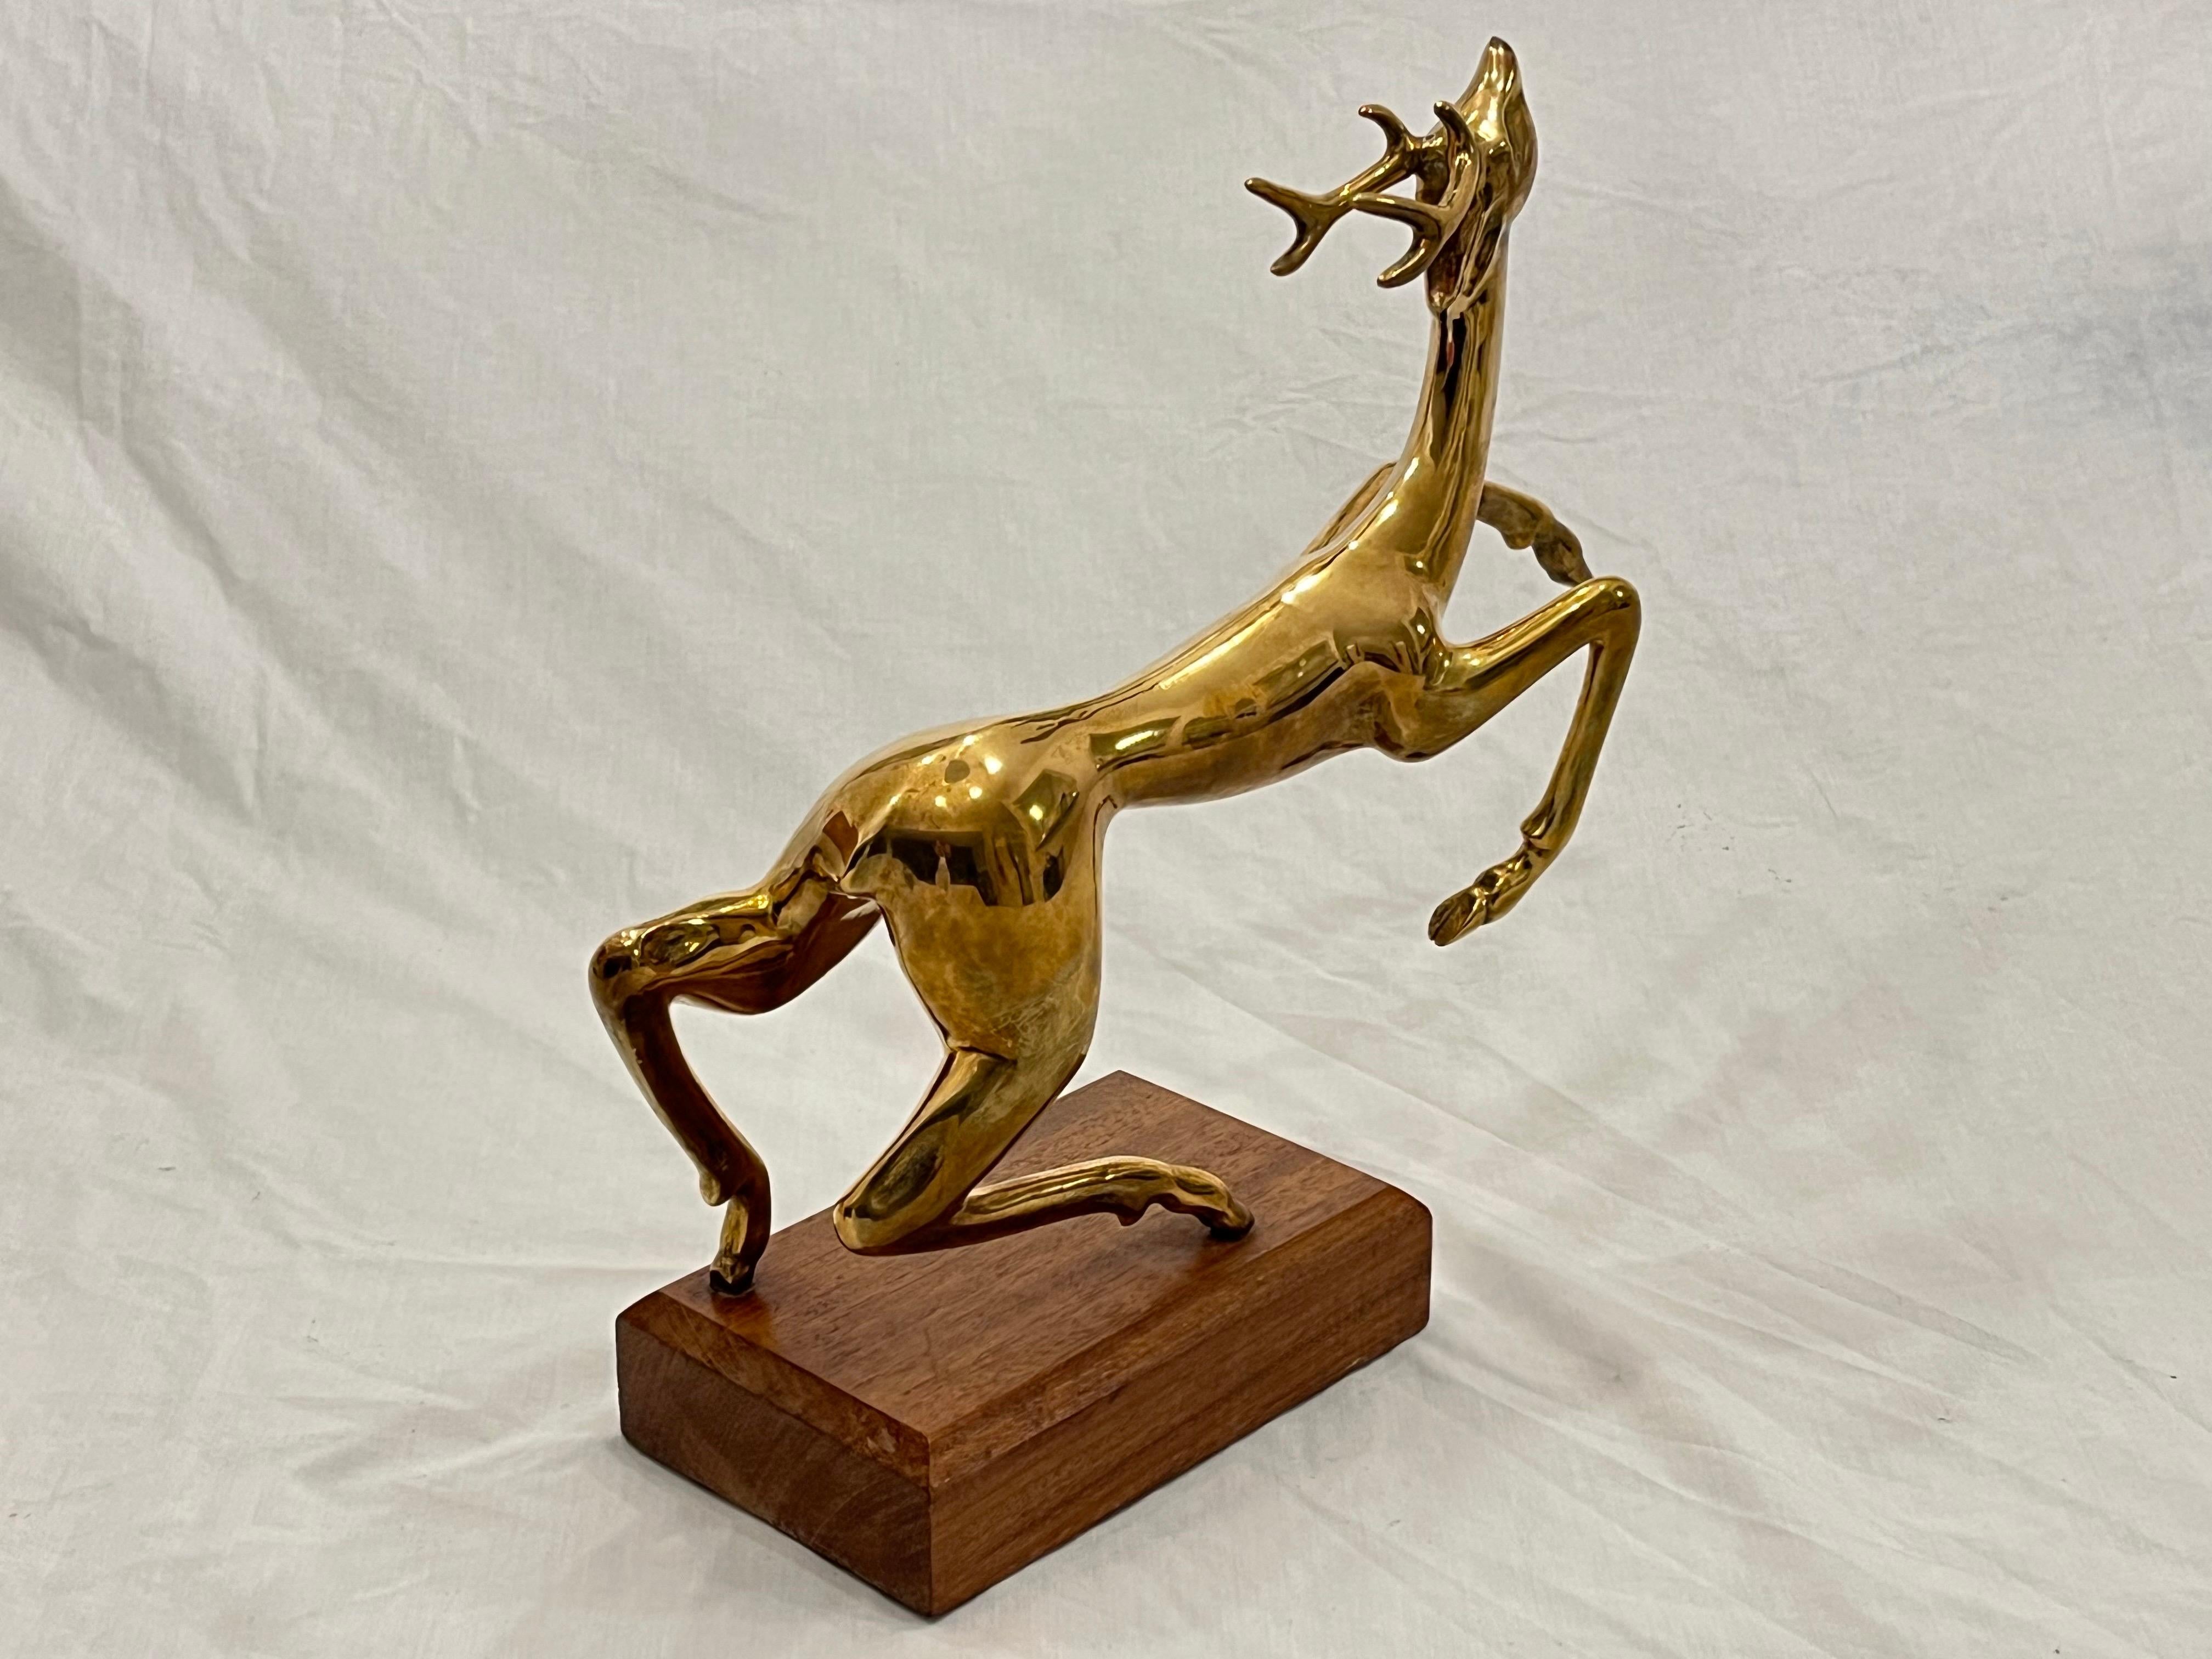 American Vintage Thai Somchai Hattakitkosol Signed Solid Bronze Sculpture of Leaping Deer For Sale